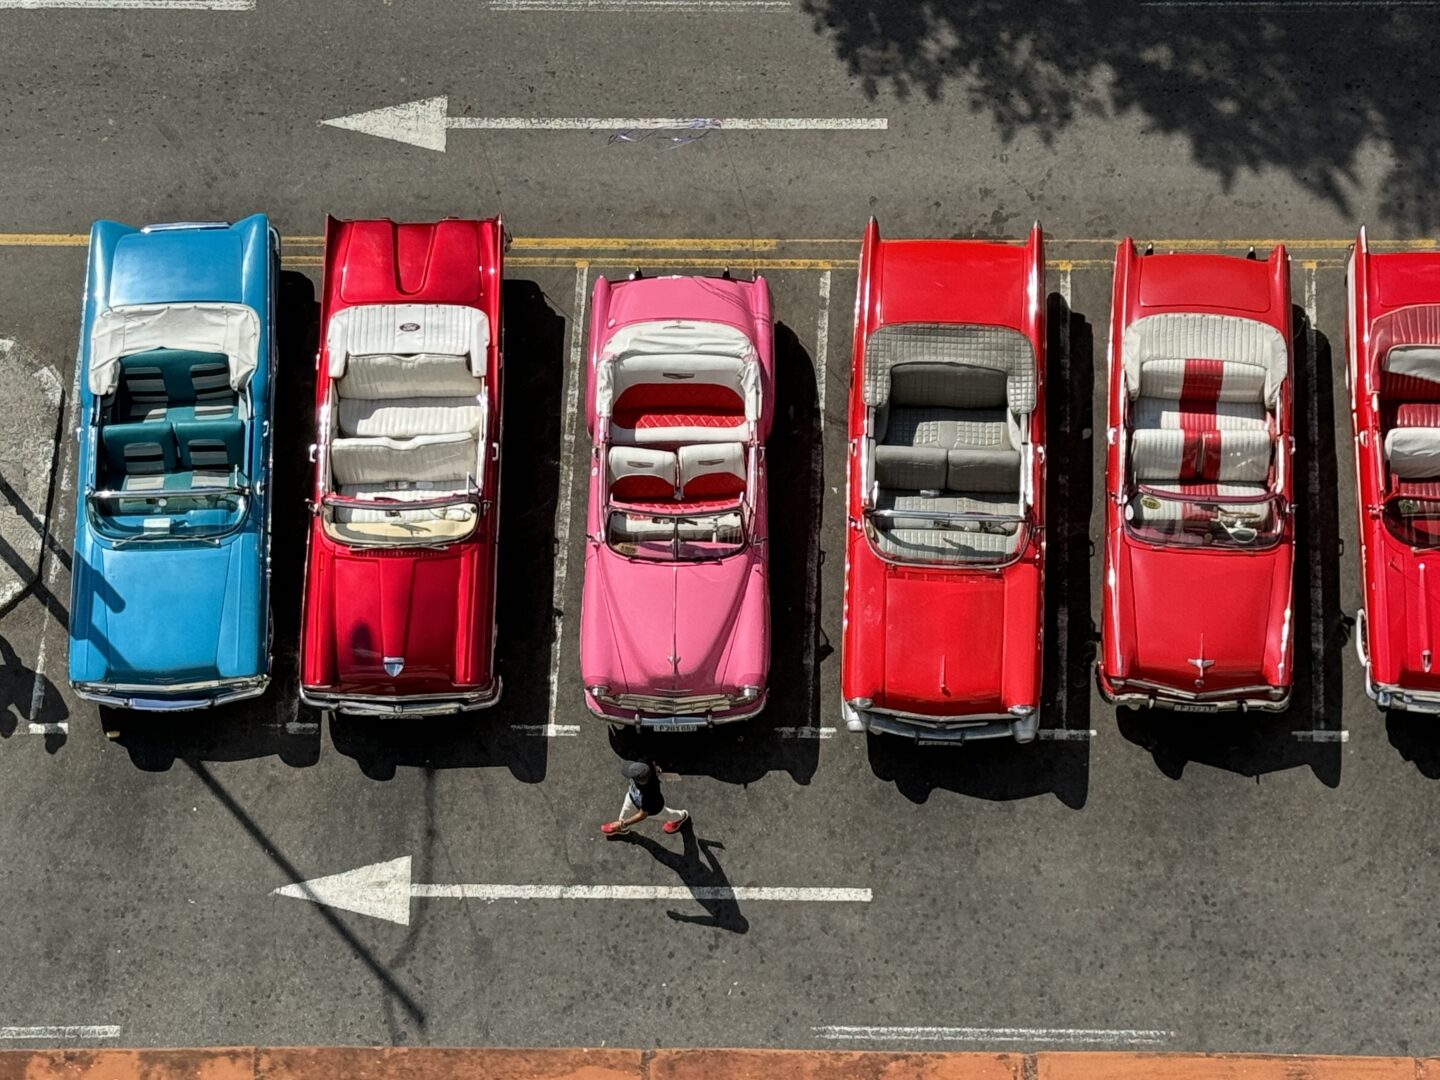 Row of classic cars with person walking in the square, Havana, Cuba, by Carol Schiraldi of Carol's Little World 